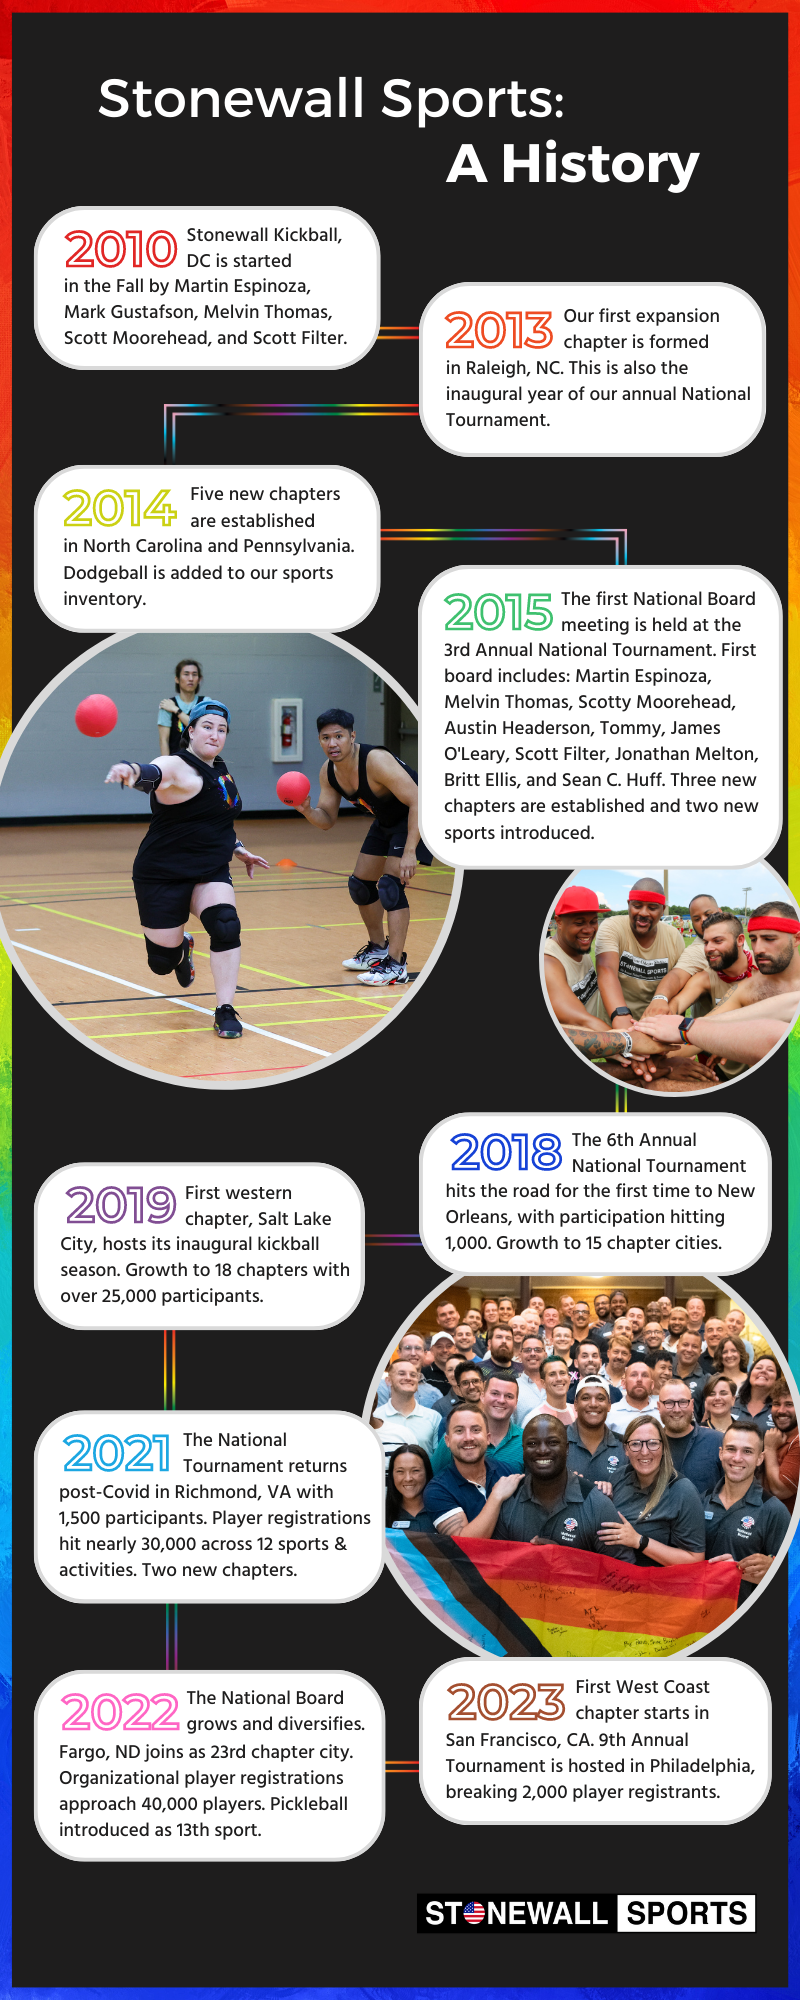 An infographic showing the history of Stonewall Sports, Inc. from 2010 until now.